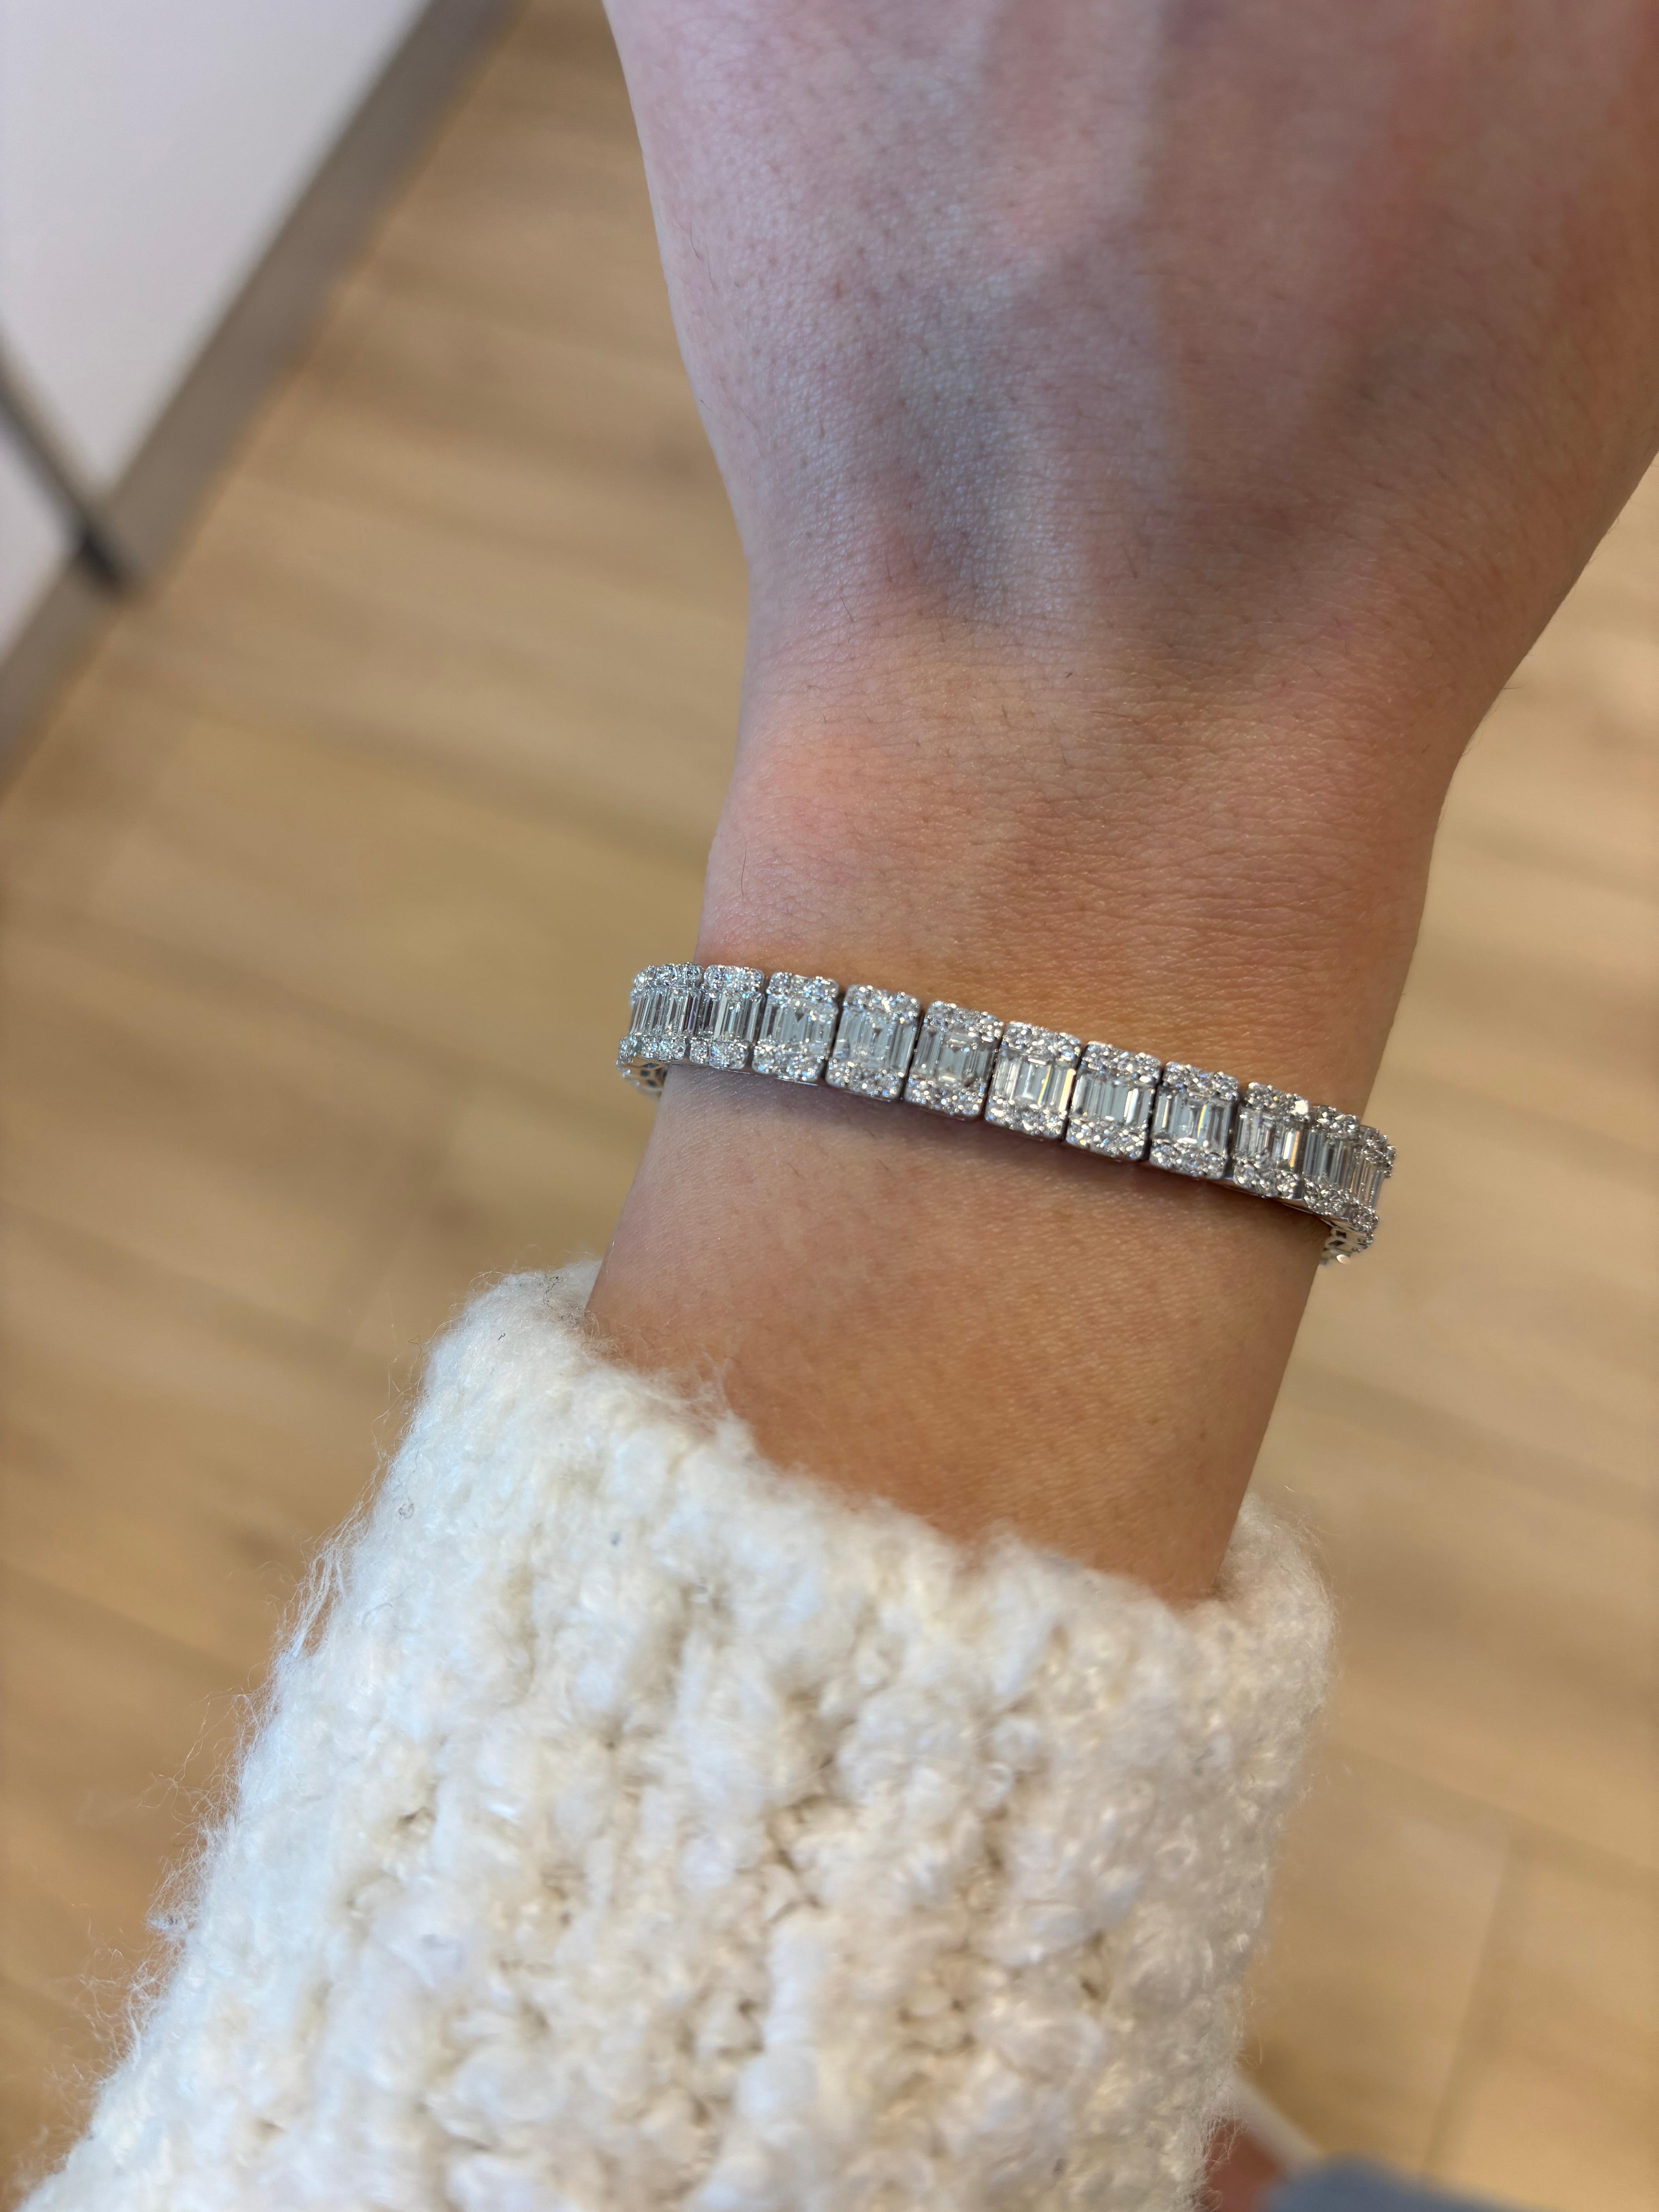 Sensational modern round and baguette 18k white gold bracelet.. By Alexander Beverly Hills.
315 round, baguette, and princess cut diamonds, 4.85 carats. Approximately G/H color and SI clarity. 18k white gold, 22.87 grams, 7 inches.
Accommodated with